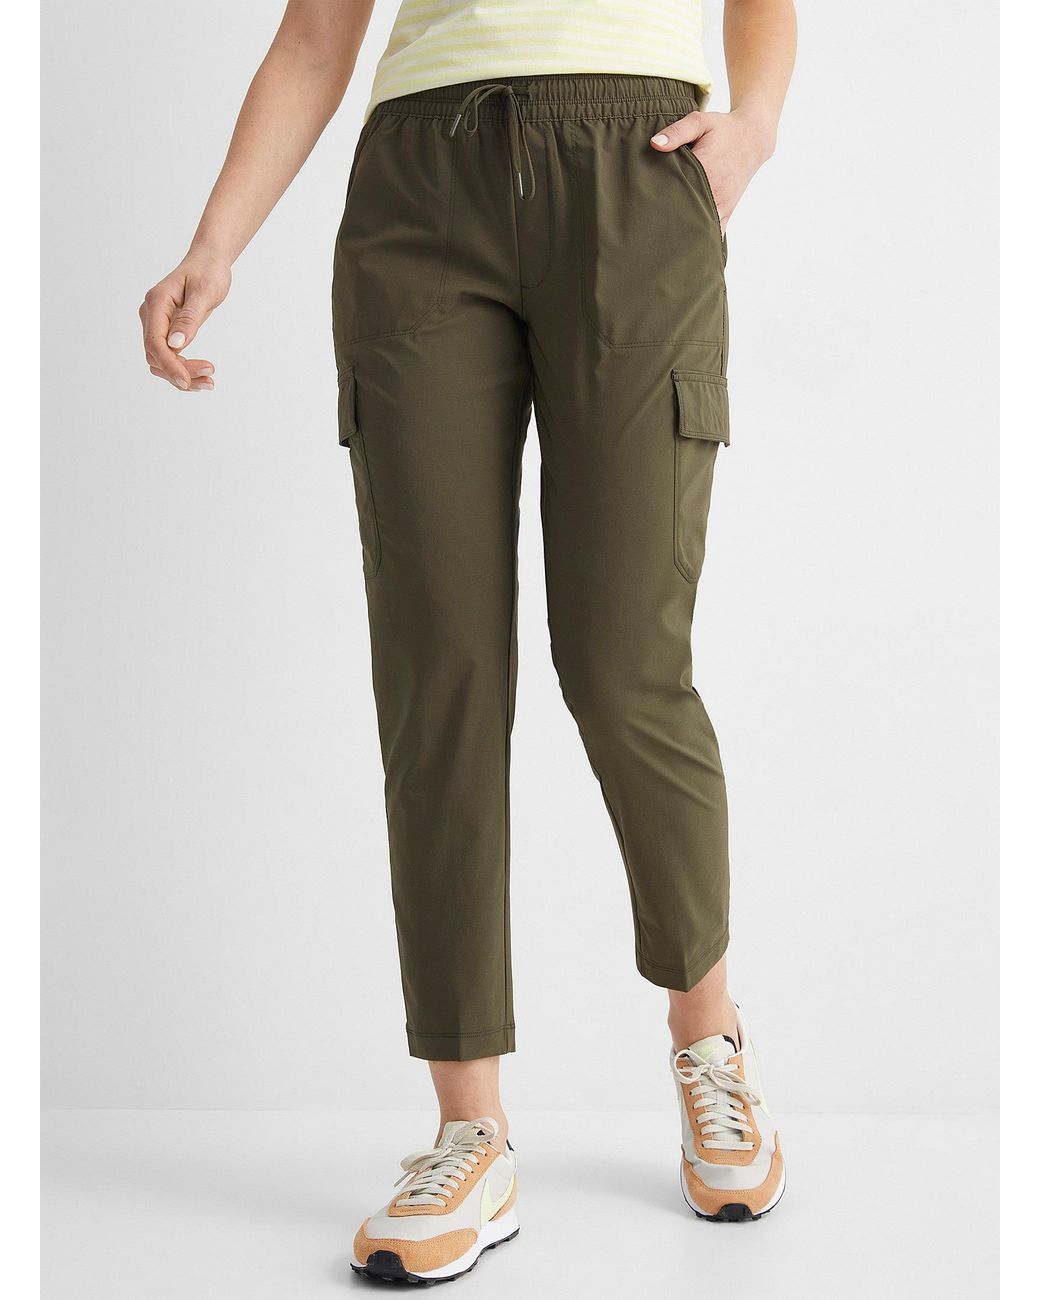 The North Face Never Stop Wearing Cargo Pant in Khaki (Green) - Lyst